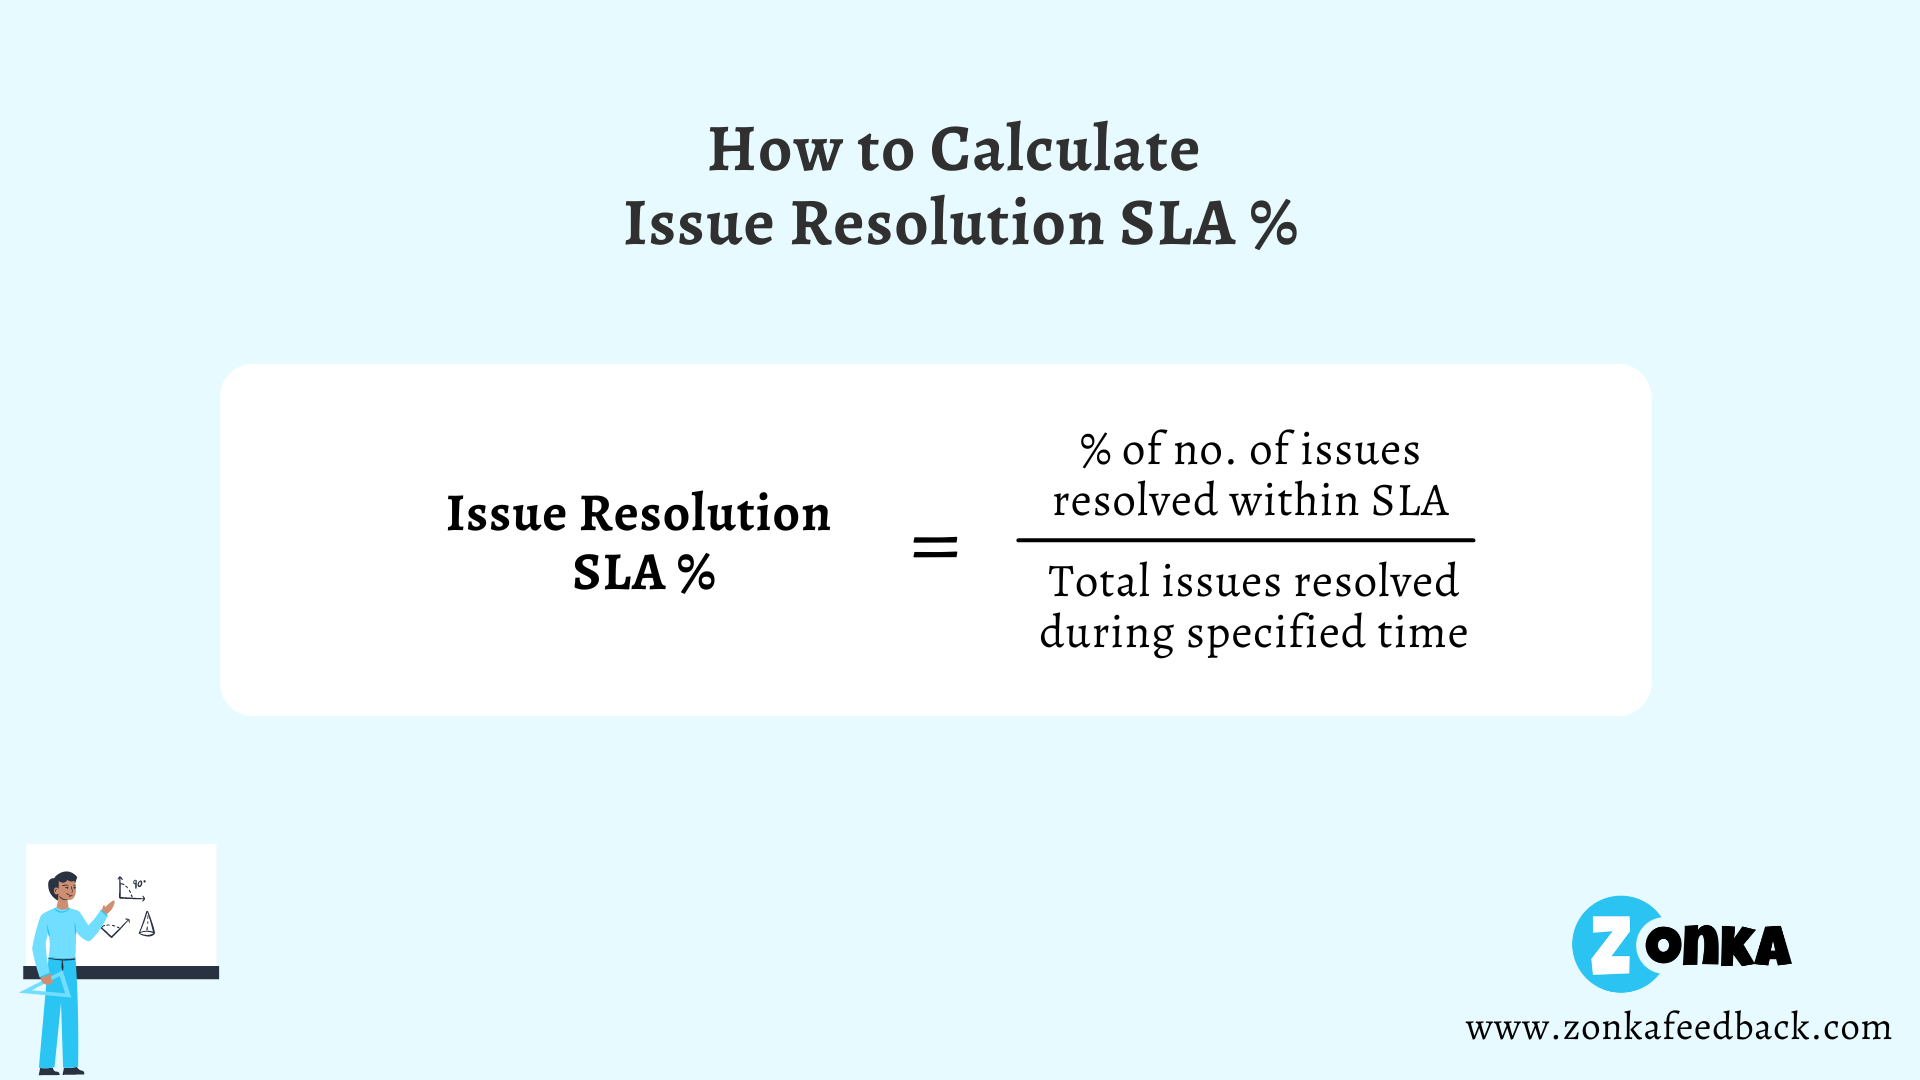 Formula to Calculate Issue Resolution SLA %